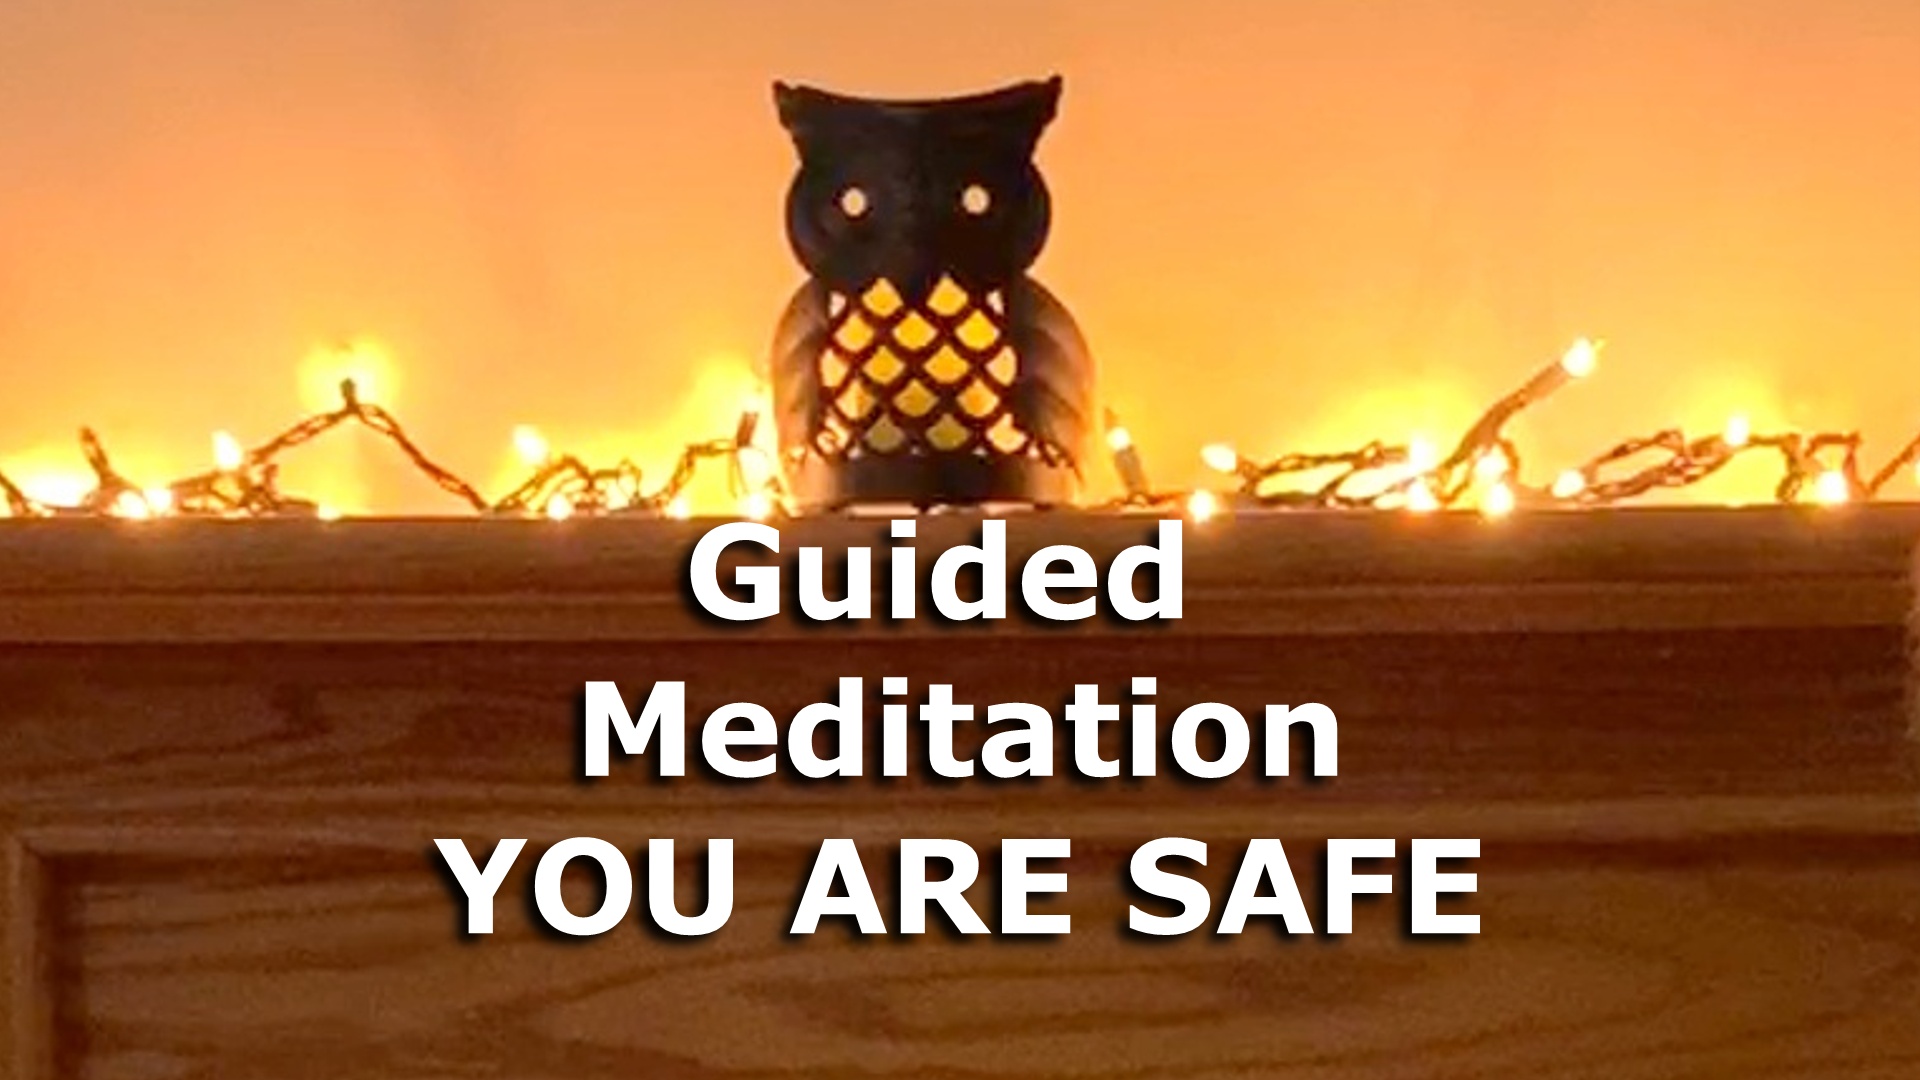 5 Minute Guided Meditation You Are Safe